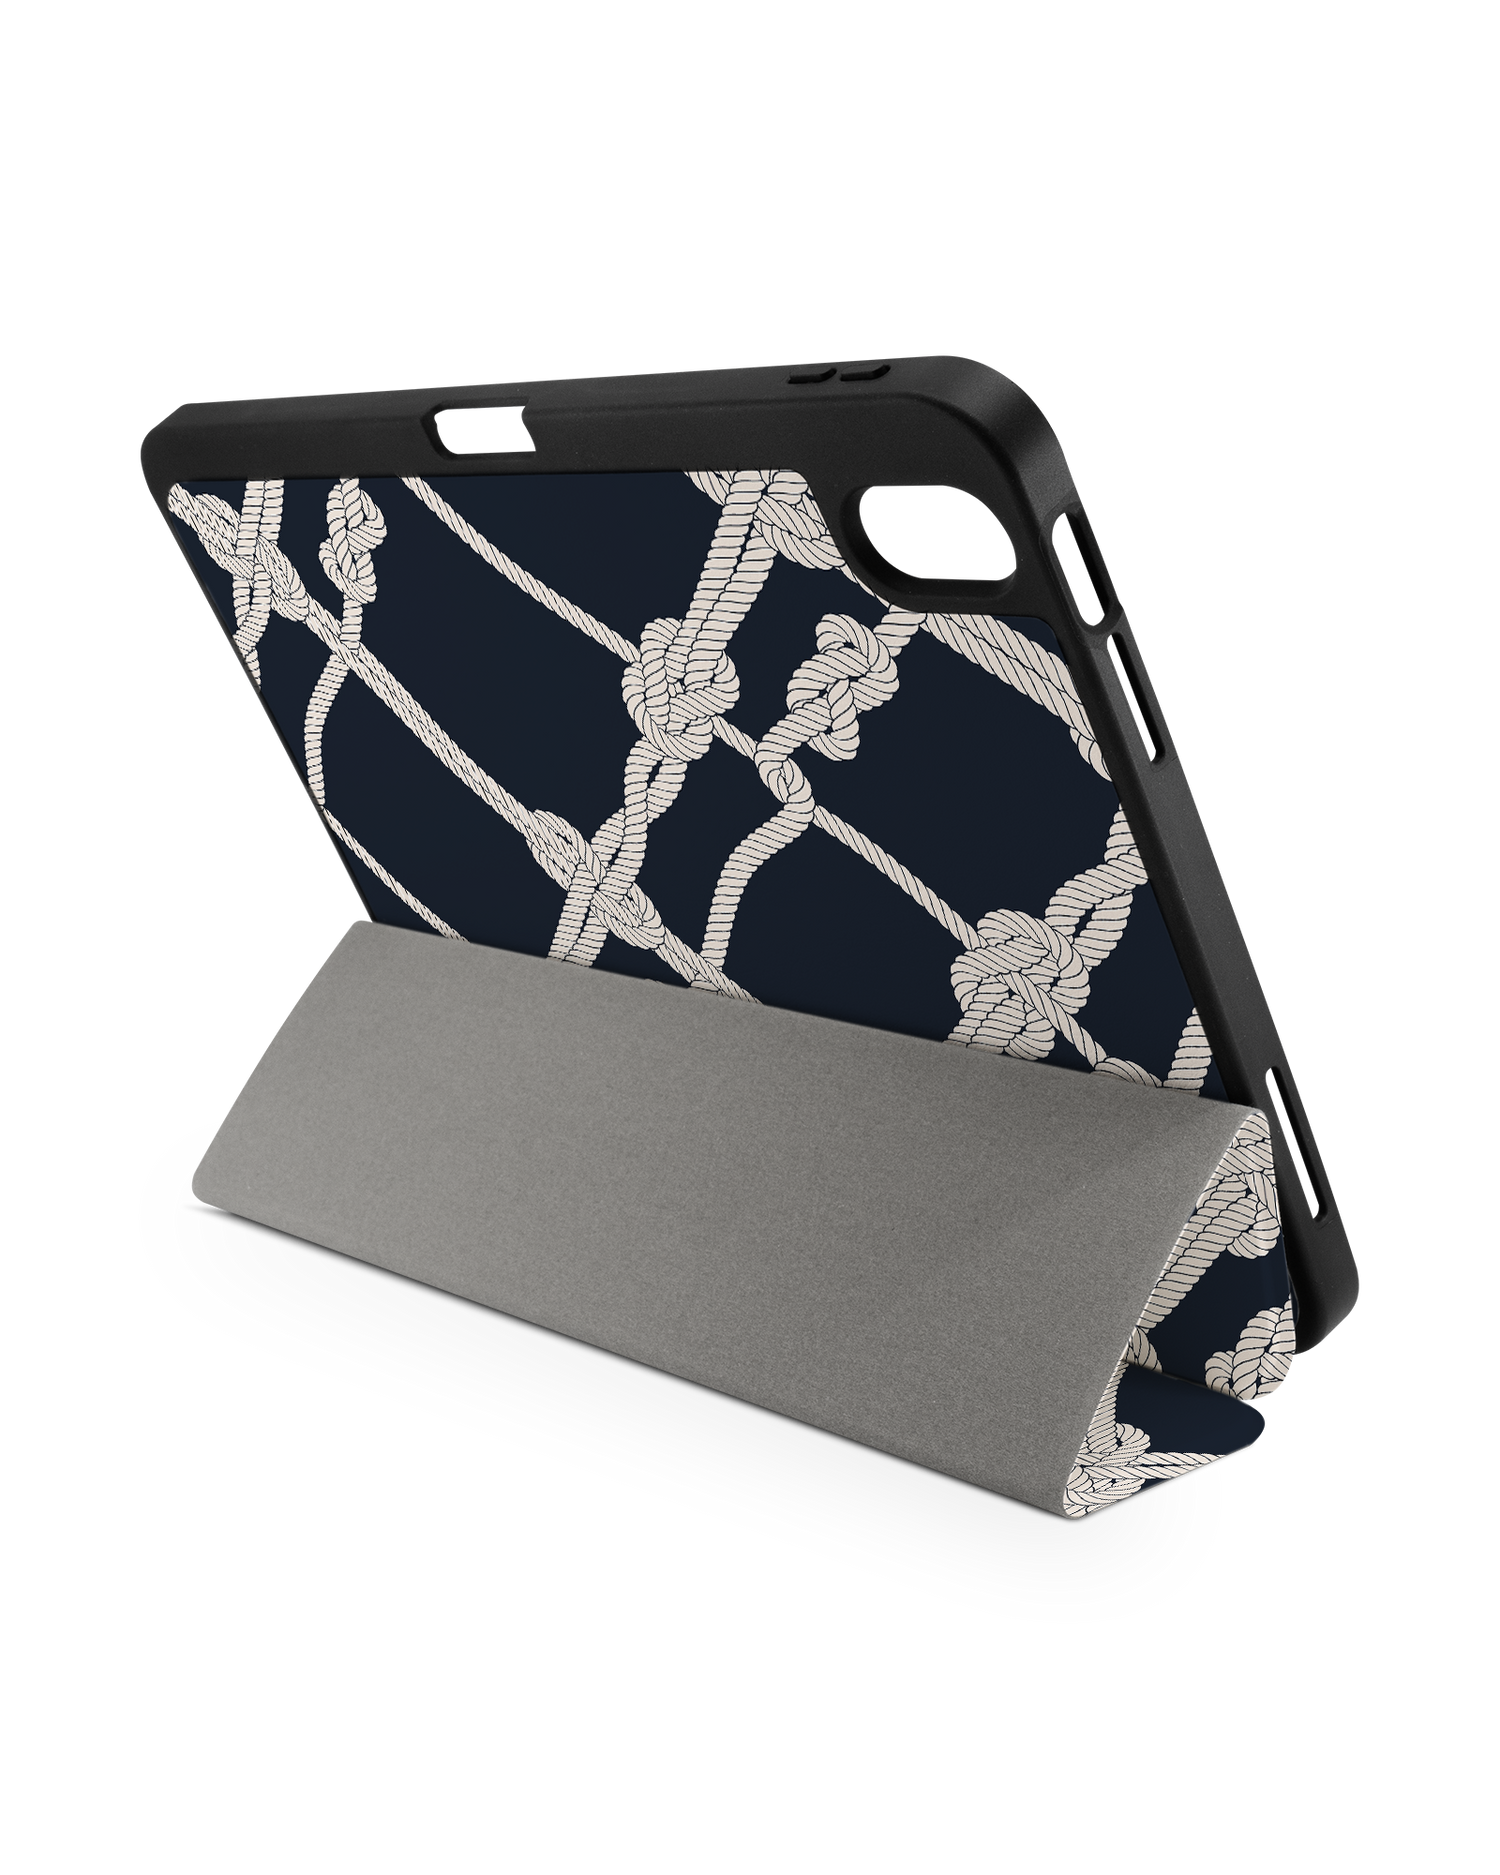 Nautical Knots iPad Case with Pencil Holder for Apple iPad (10th Generation): Set up in landscape format (back view)